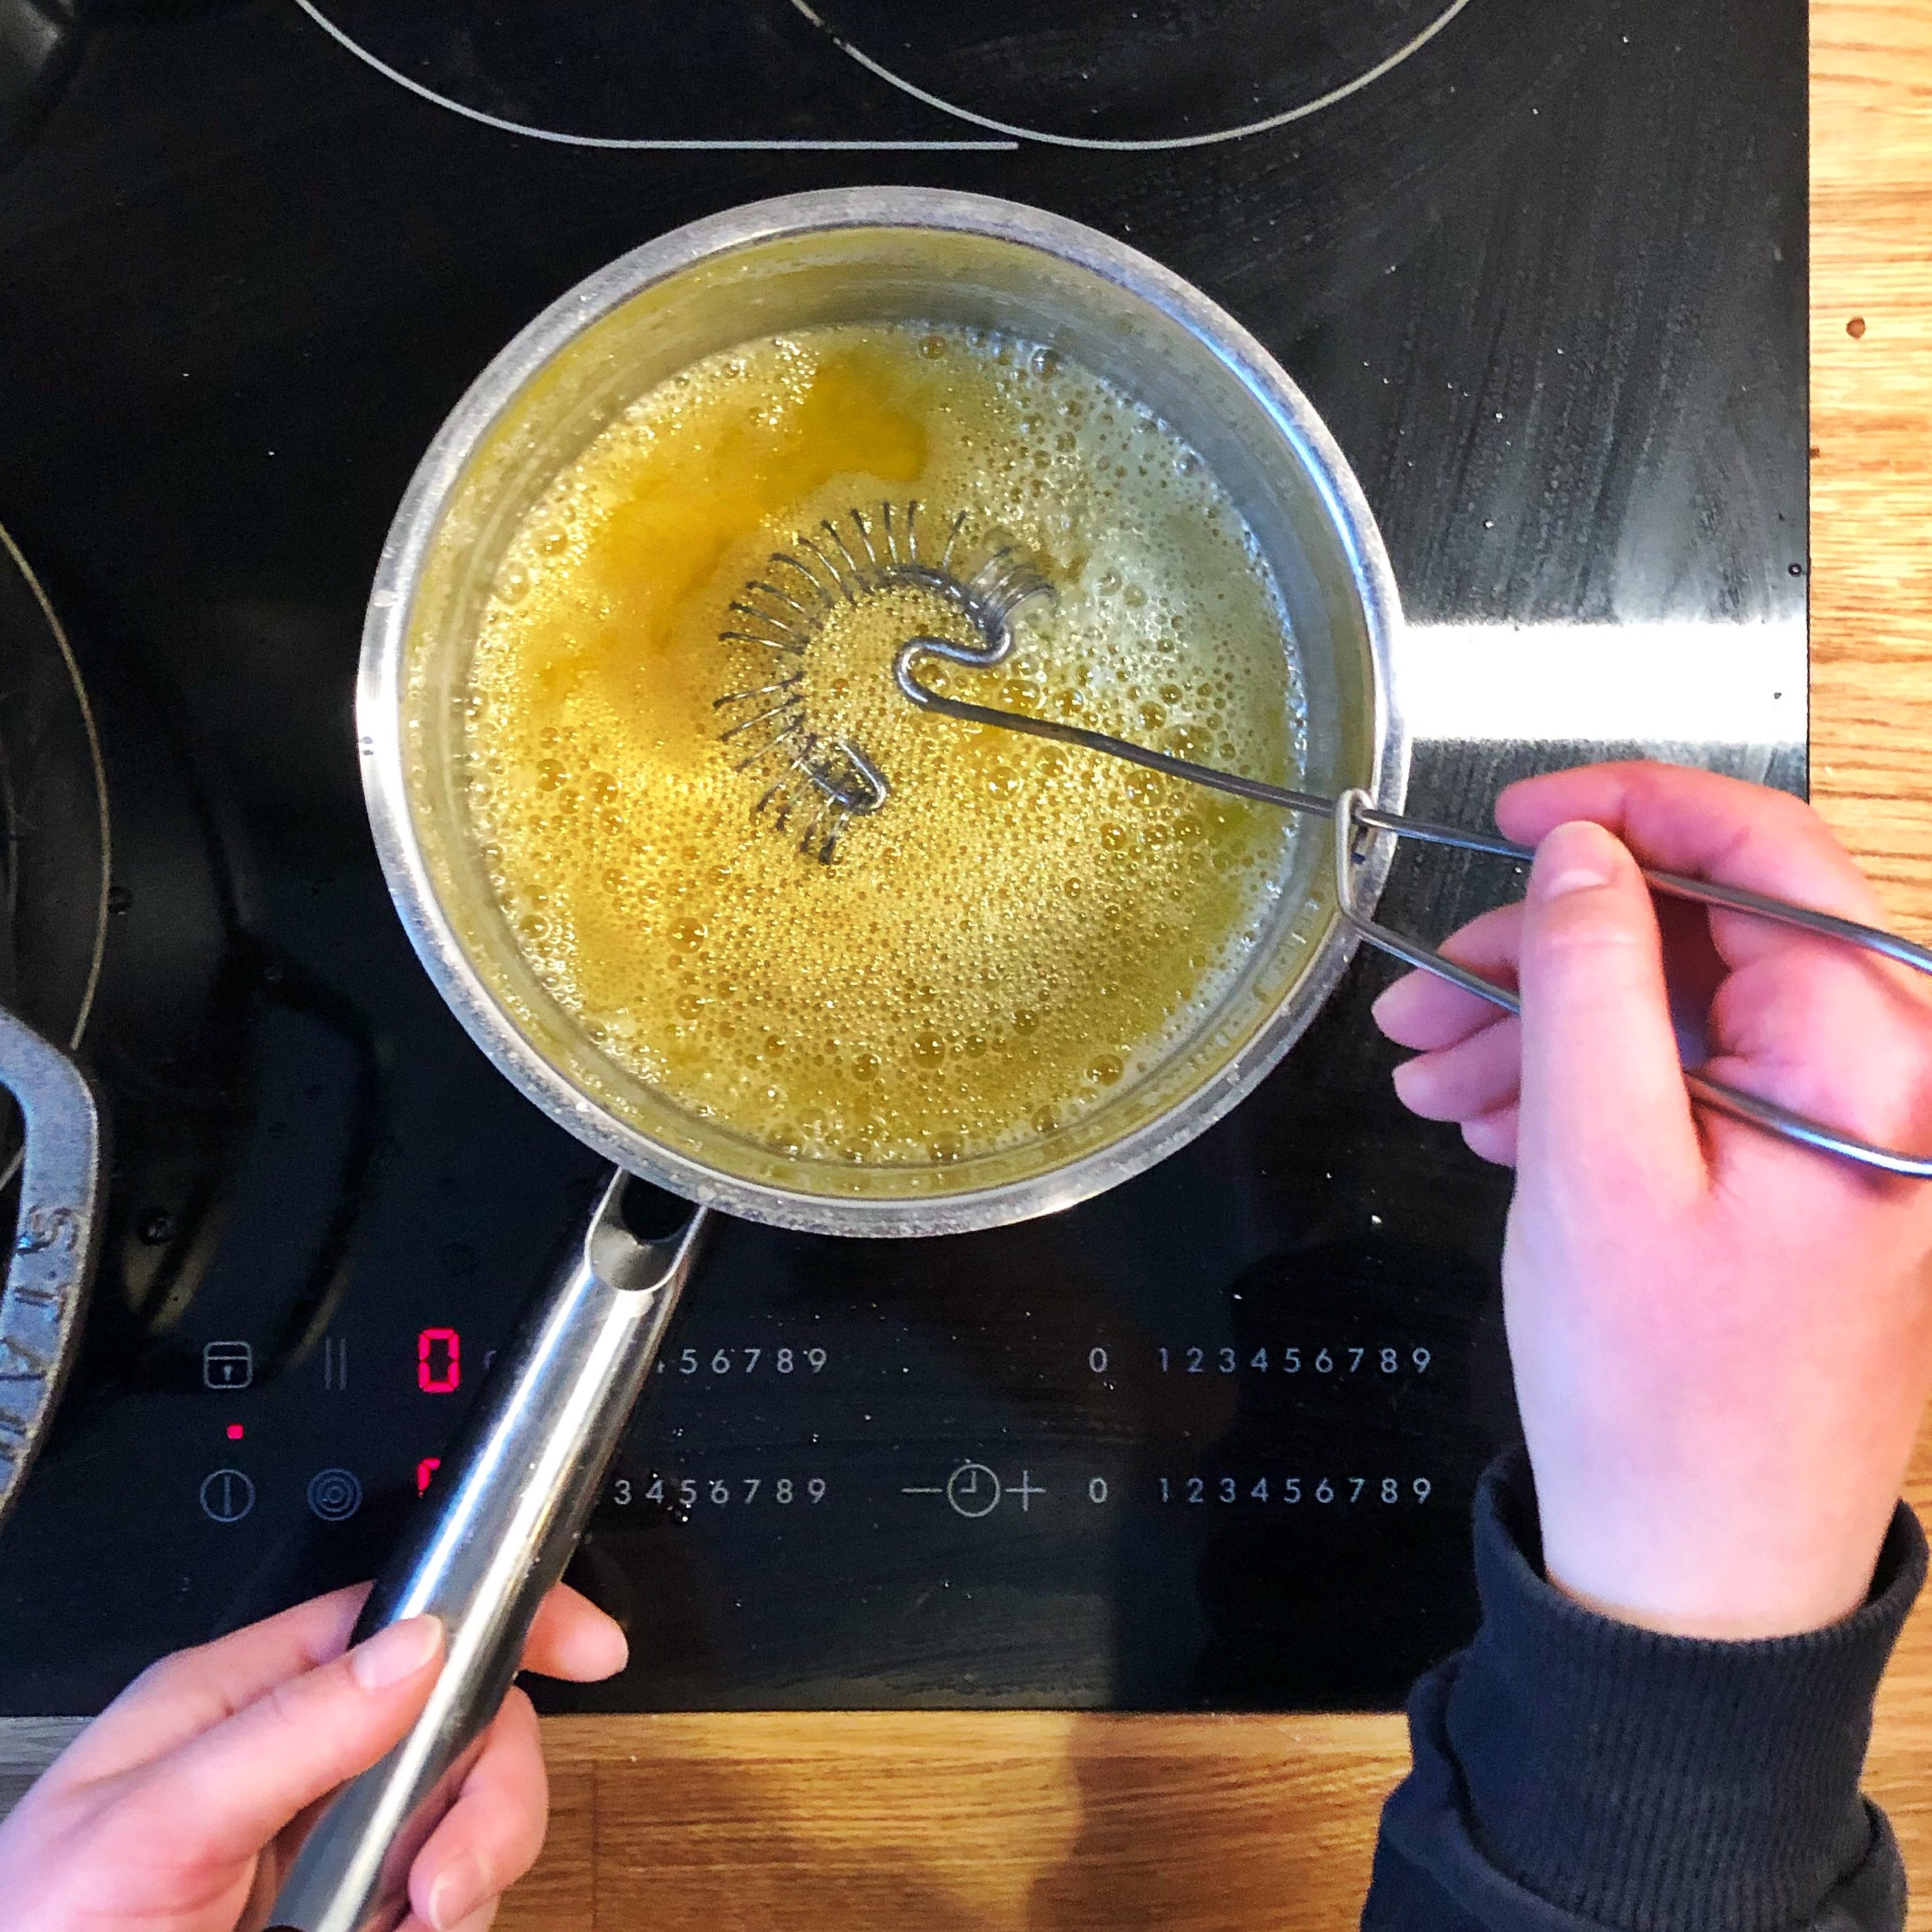 Melt butter in a small pot and bring to a "boil." While constantly whisking, let it simmer and splutter until the butter smells nutty and is light brown in color. Transfer to a bowl to stop the cooking process, and let the butter cool down to room temperature.